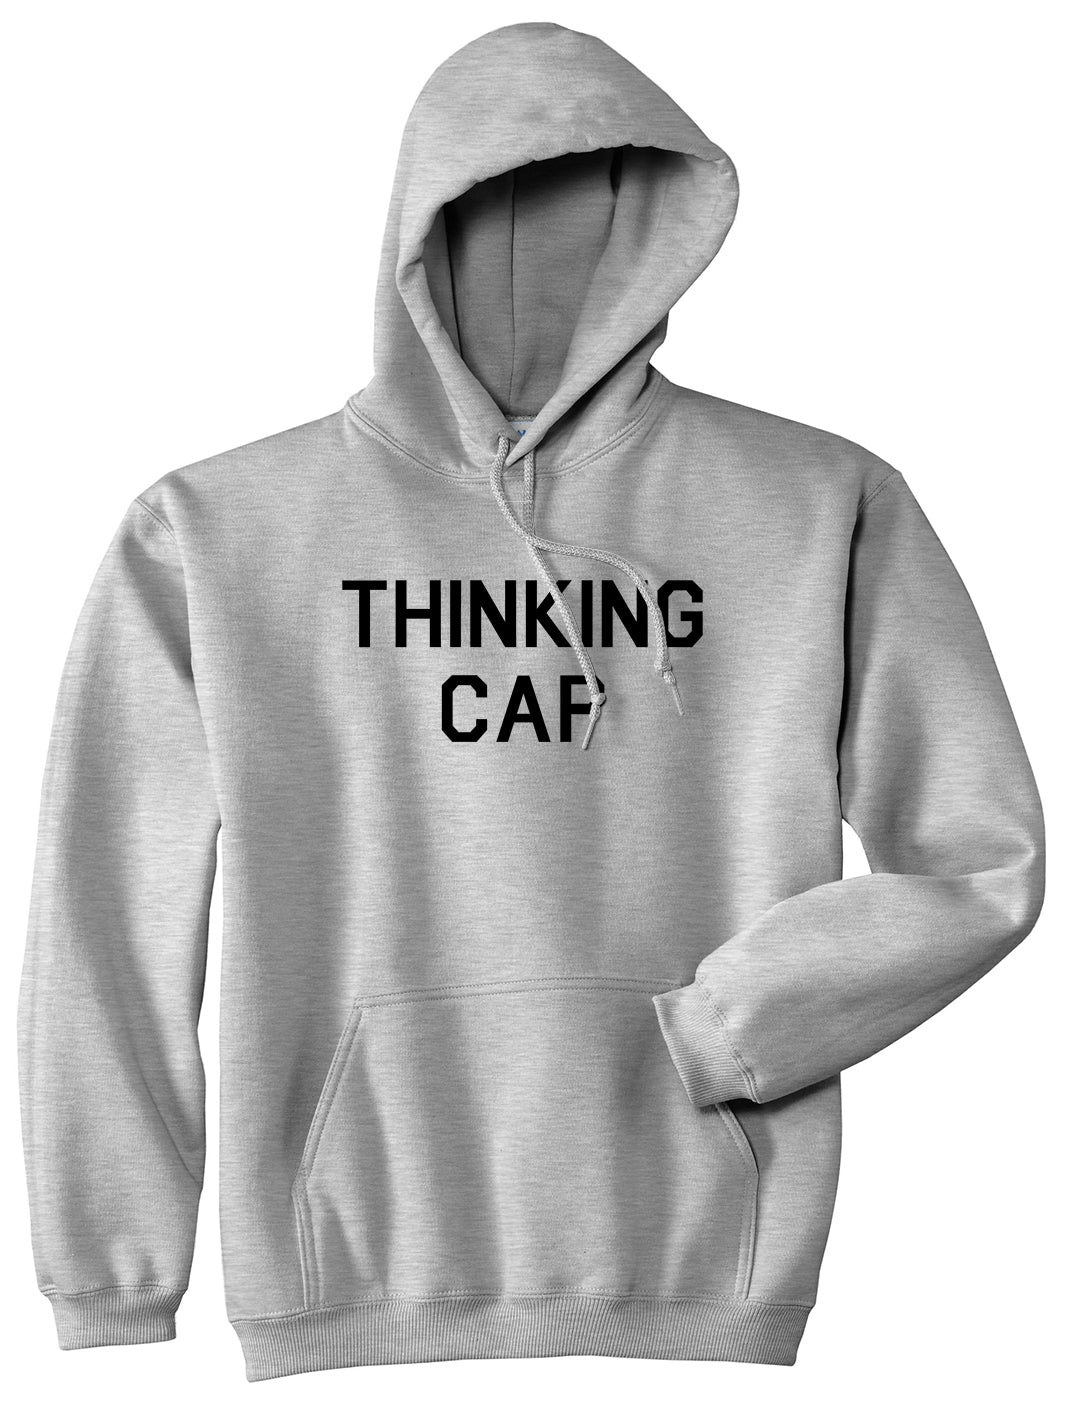 Thinking Cap Funny Nerd Grey Pullover Hoodie by Kings Of NY